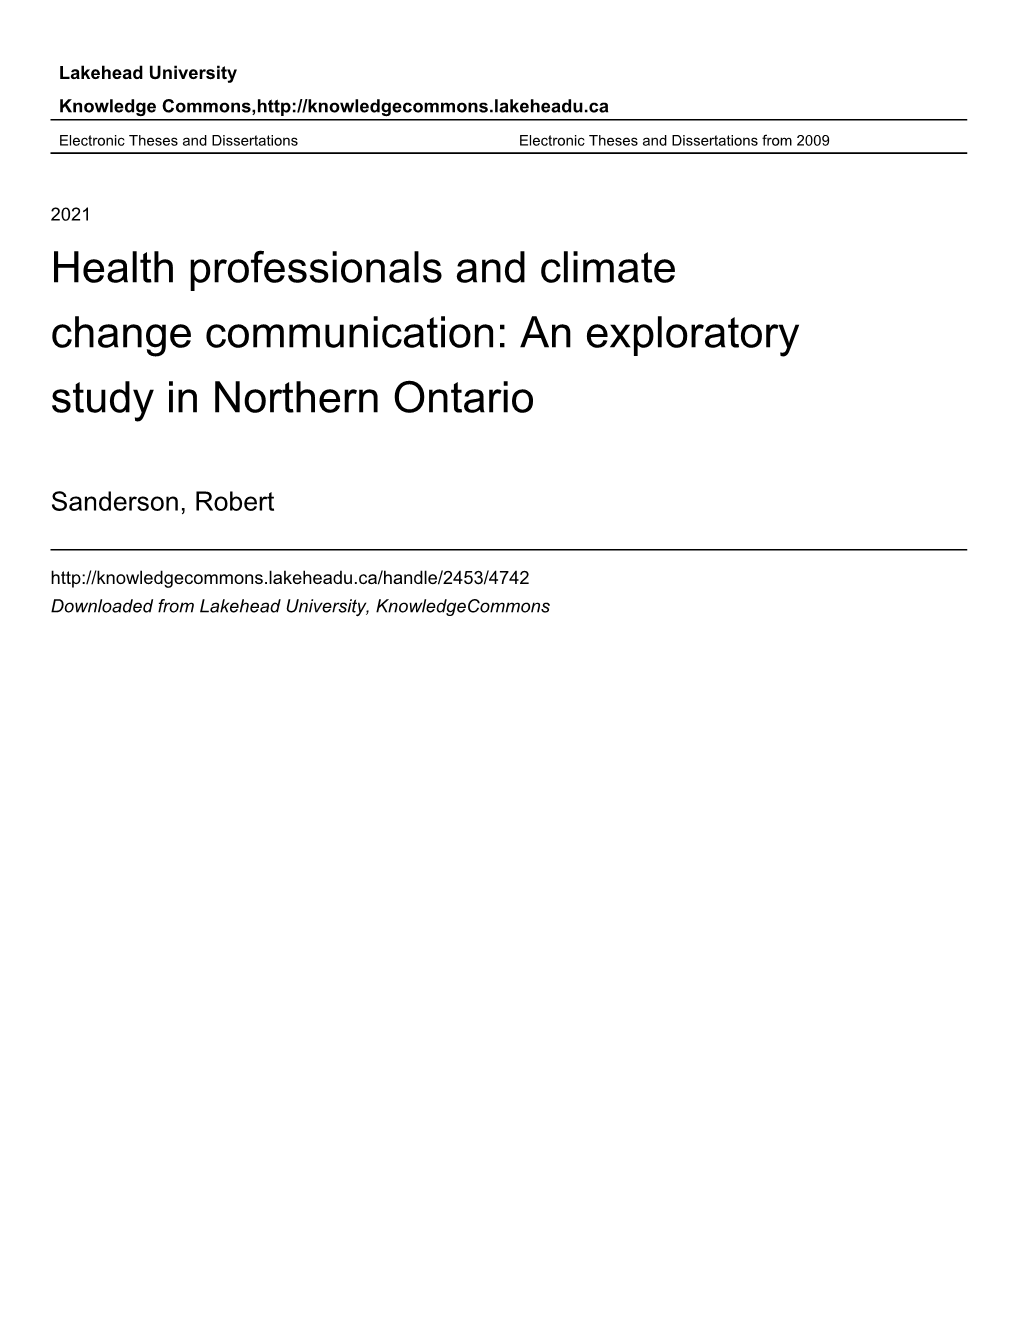 Health Professionals and Climate Change Communication: an Exploratory Study in Northern Ontario